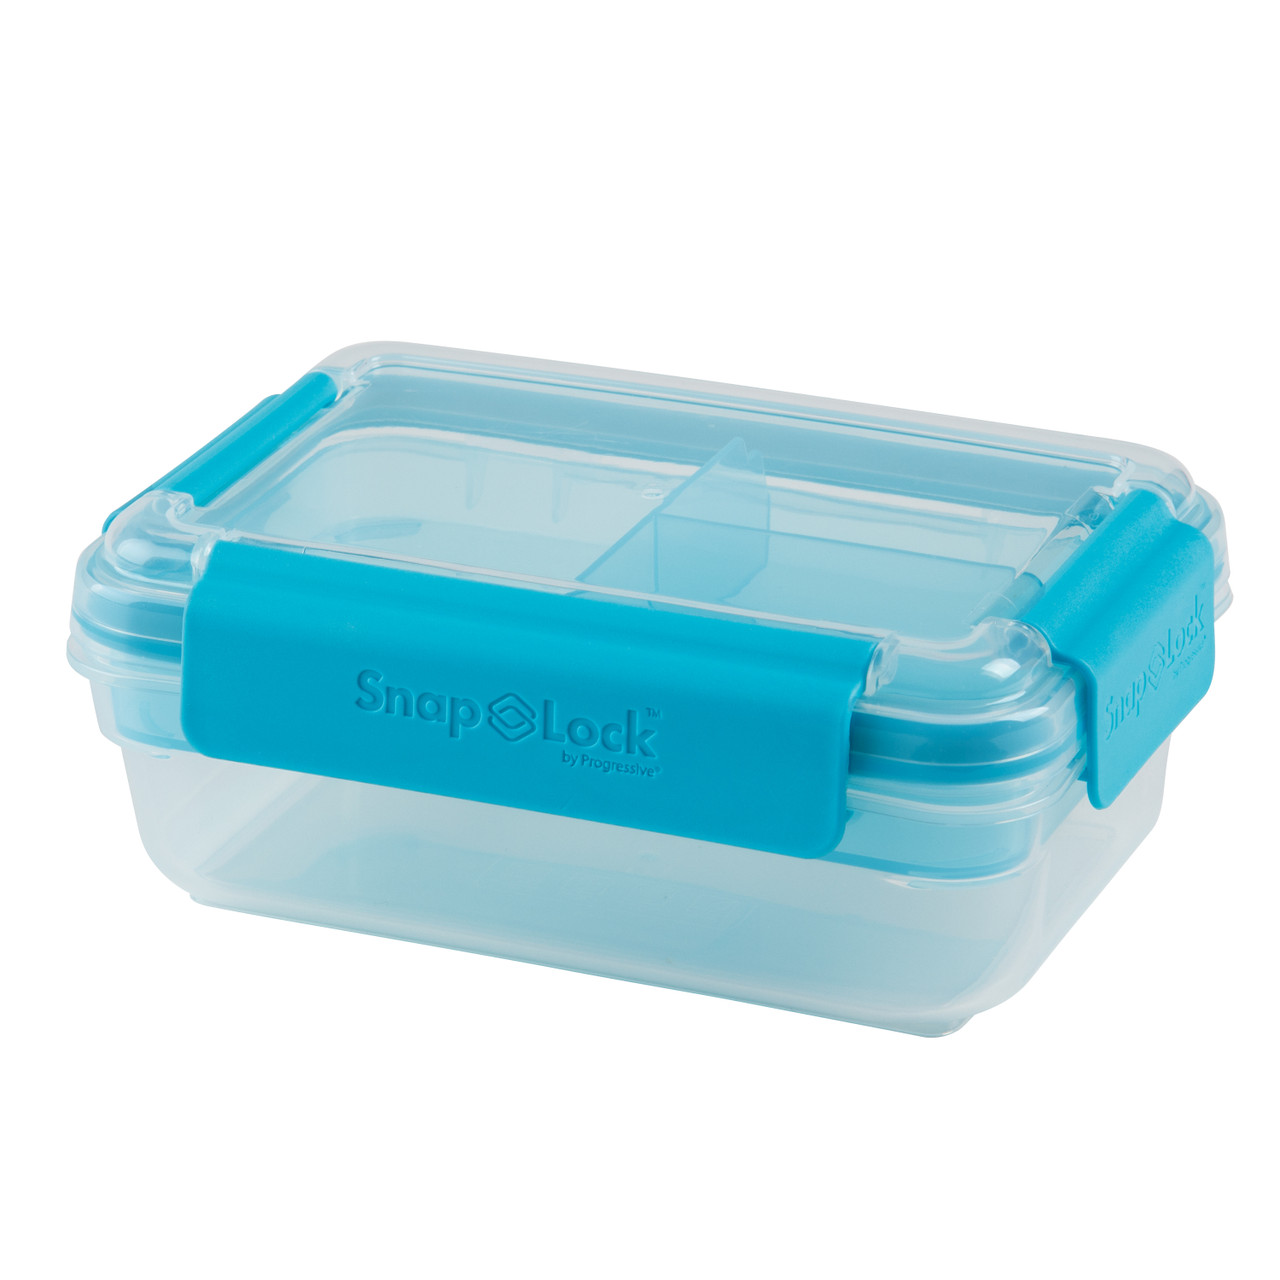 Snaplock by Progressive Snack Box Container - Blue, SNL-1020B Easy-To-Open, Leak-Proof Silicone Seal, Snap-Off Lid, Stackable